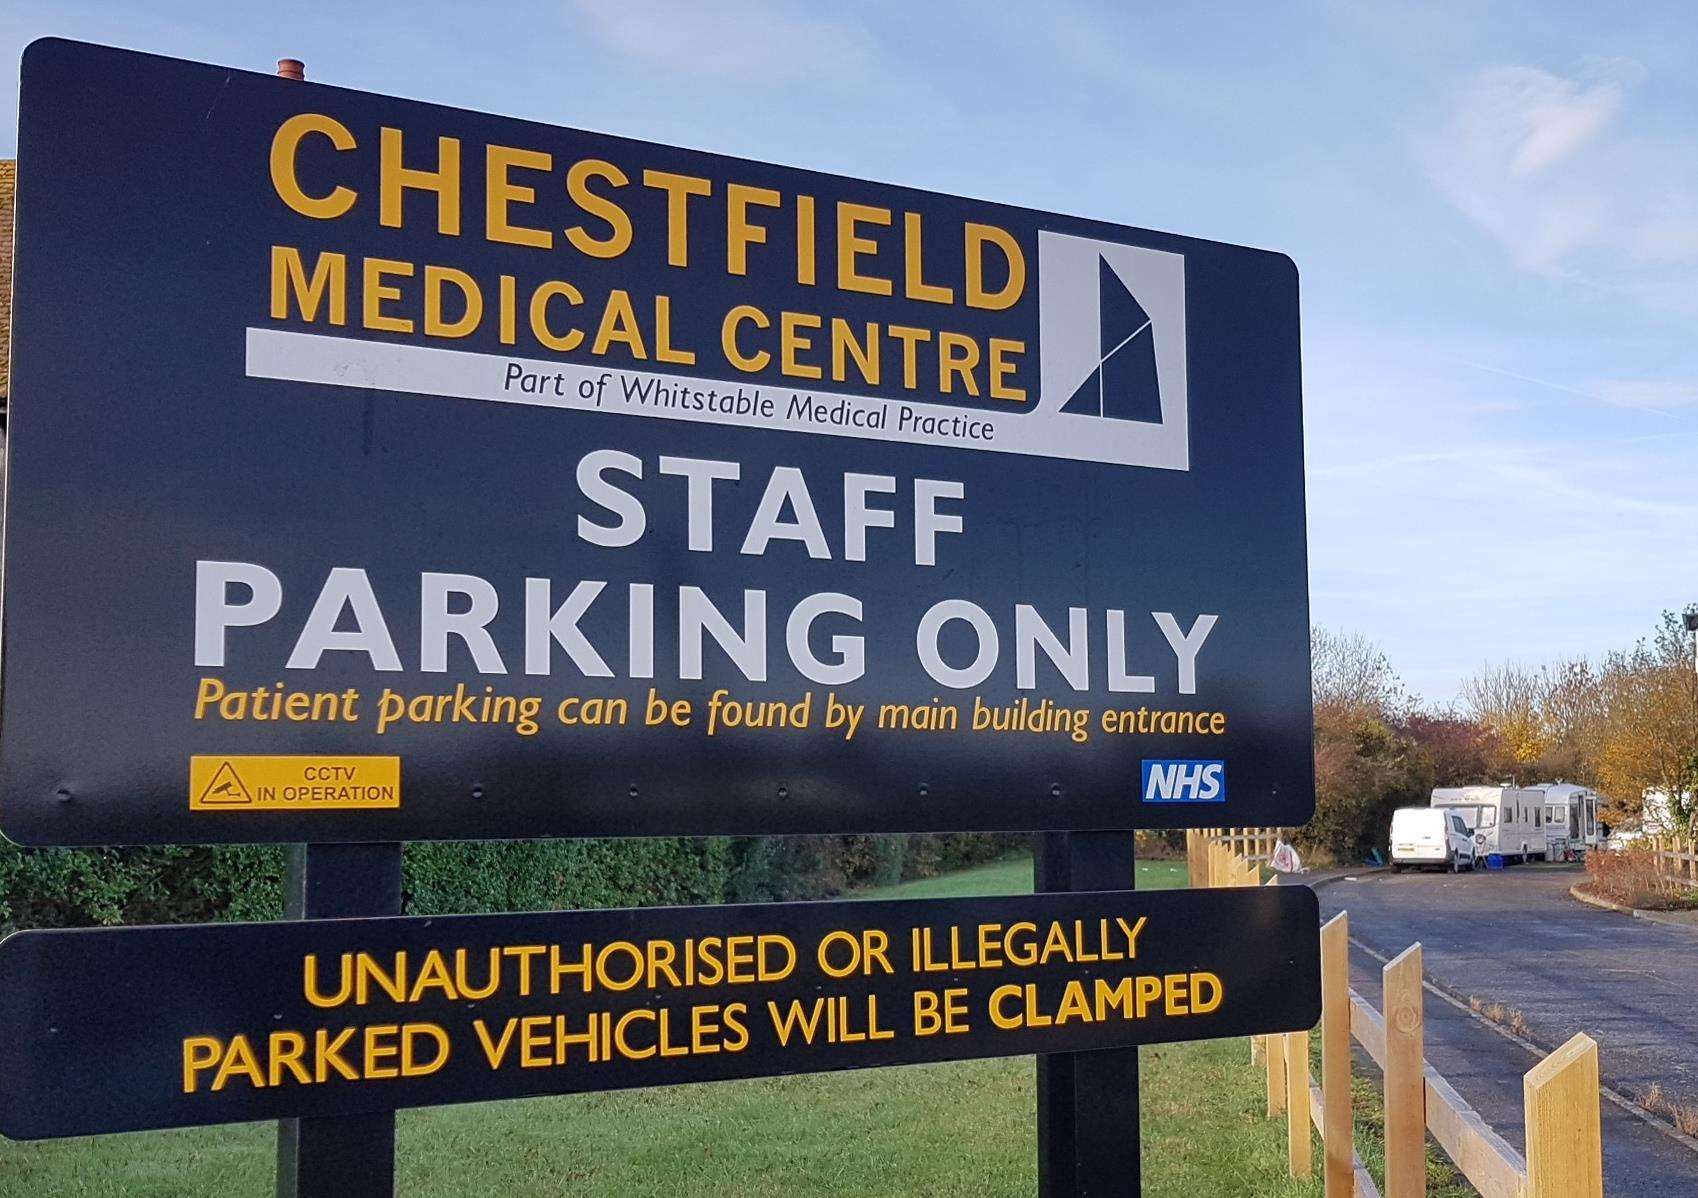 The staff car park at Chestfield Medical Centre was blocked